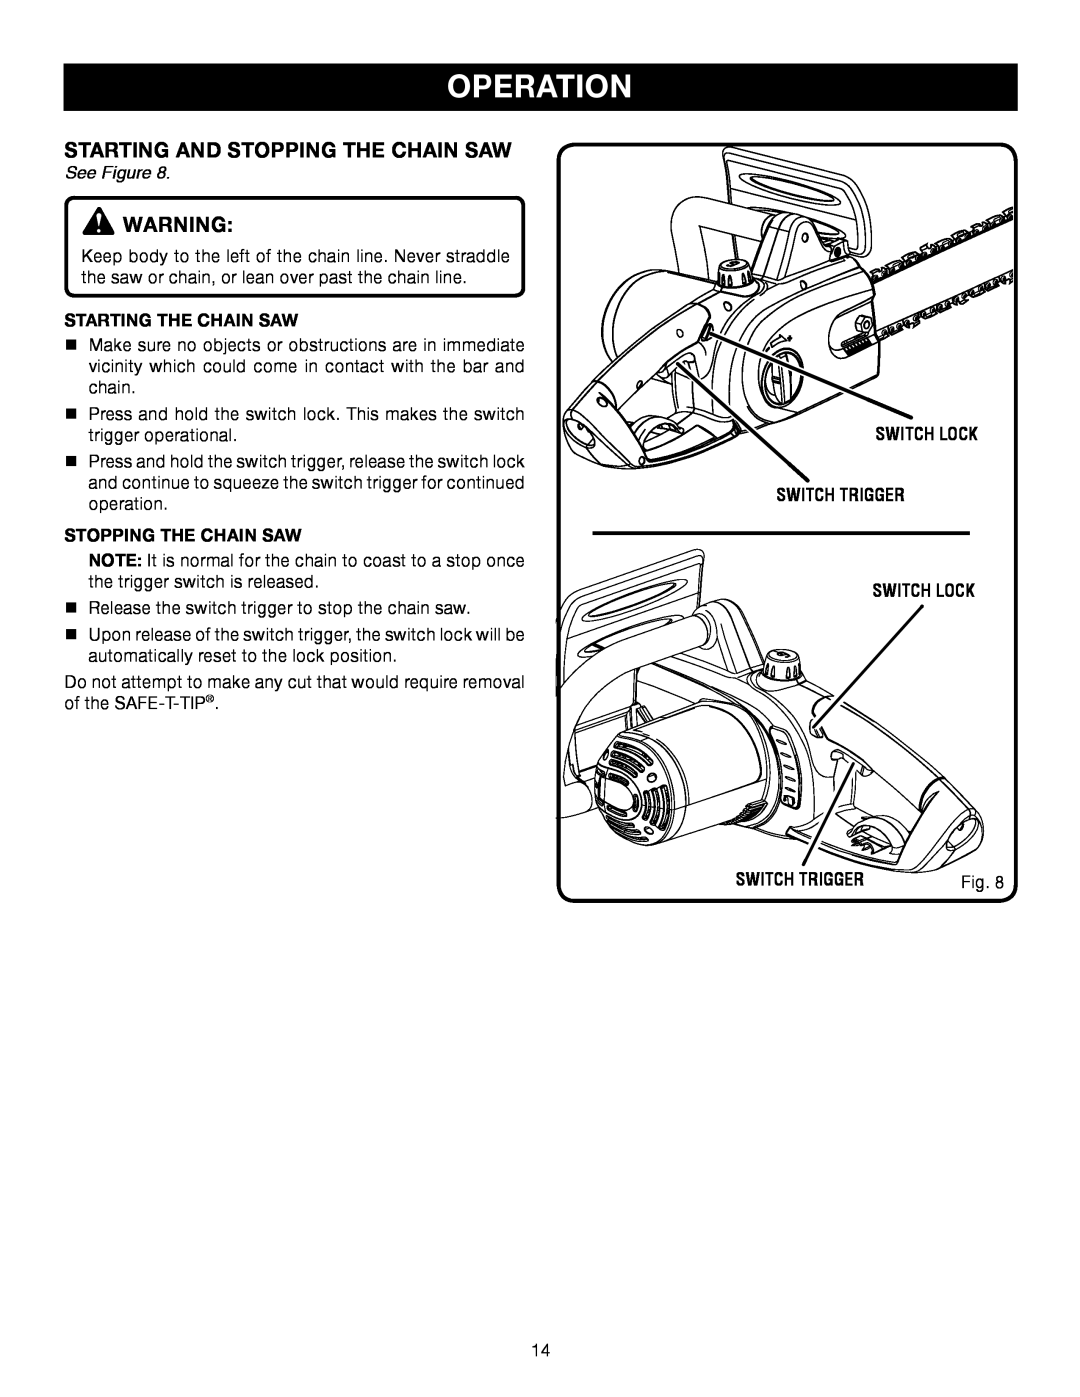 Ryobi RY43006 manual Starting And Stopping The Chain Saw, Operation, See Figure, Starting The Chain Saw, Switch Trigger 